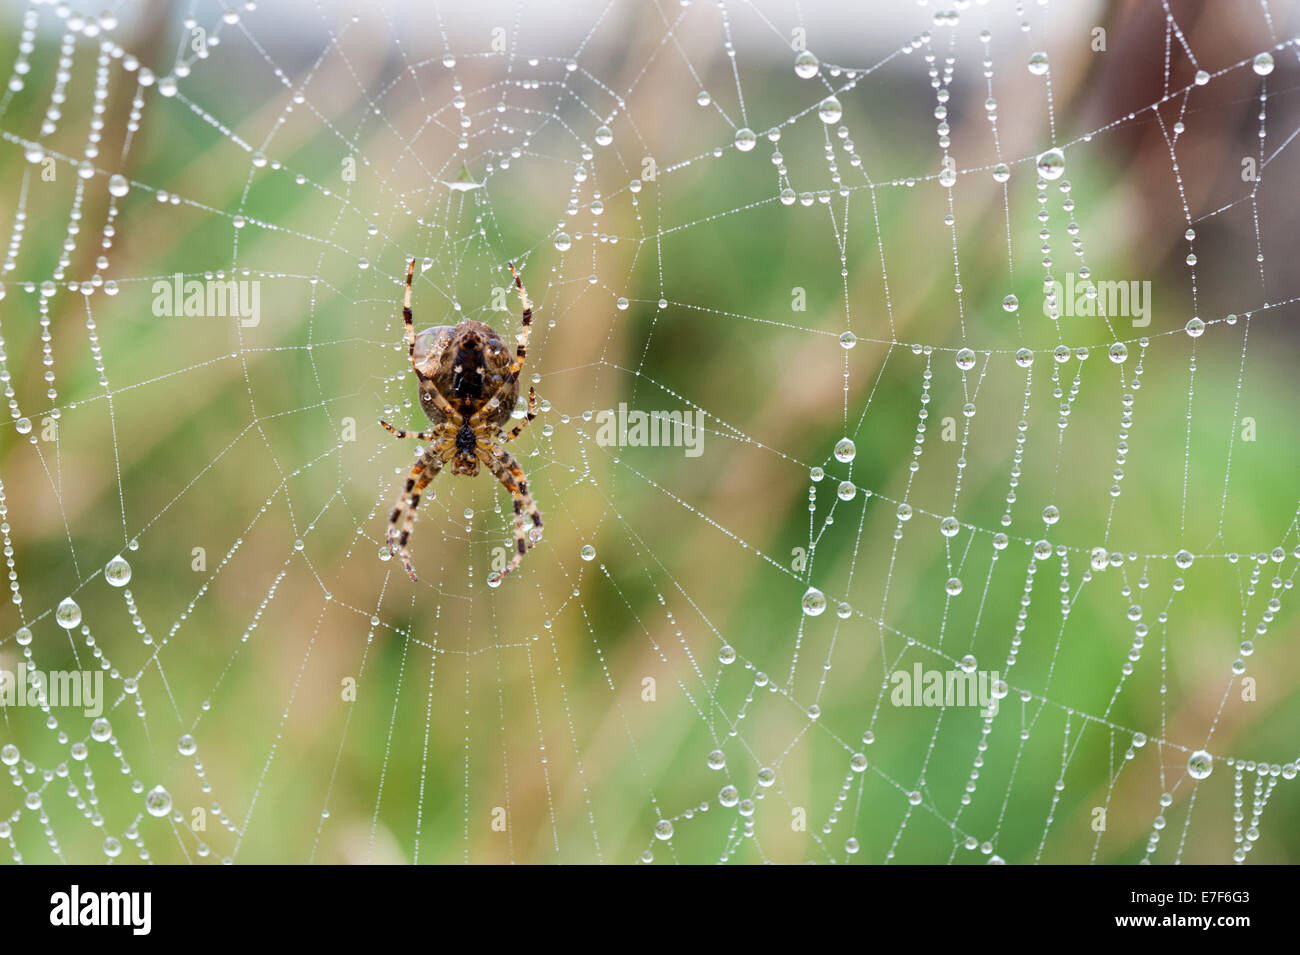 Cambridgeshire UK 16th September 2014. A common garden spider waits on its dew covered web on a foggy autumnal morning. Hundreds of tiny droplets of water from the damp air cover every delicate strand of web. The weather is expected to clear with possible showers later. Credit Julian Eales/Alamy Live News Stock Photo